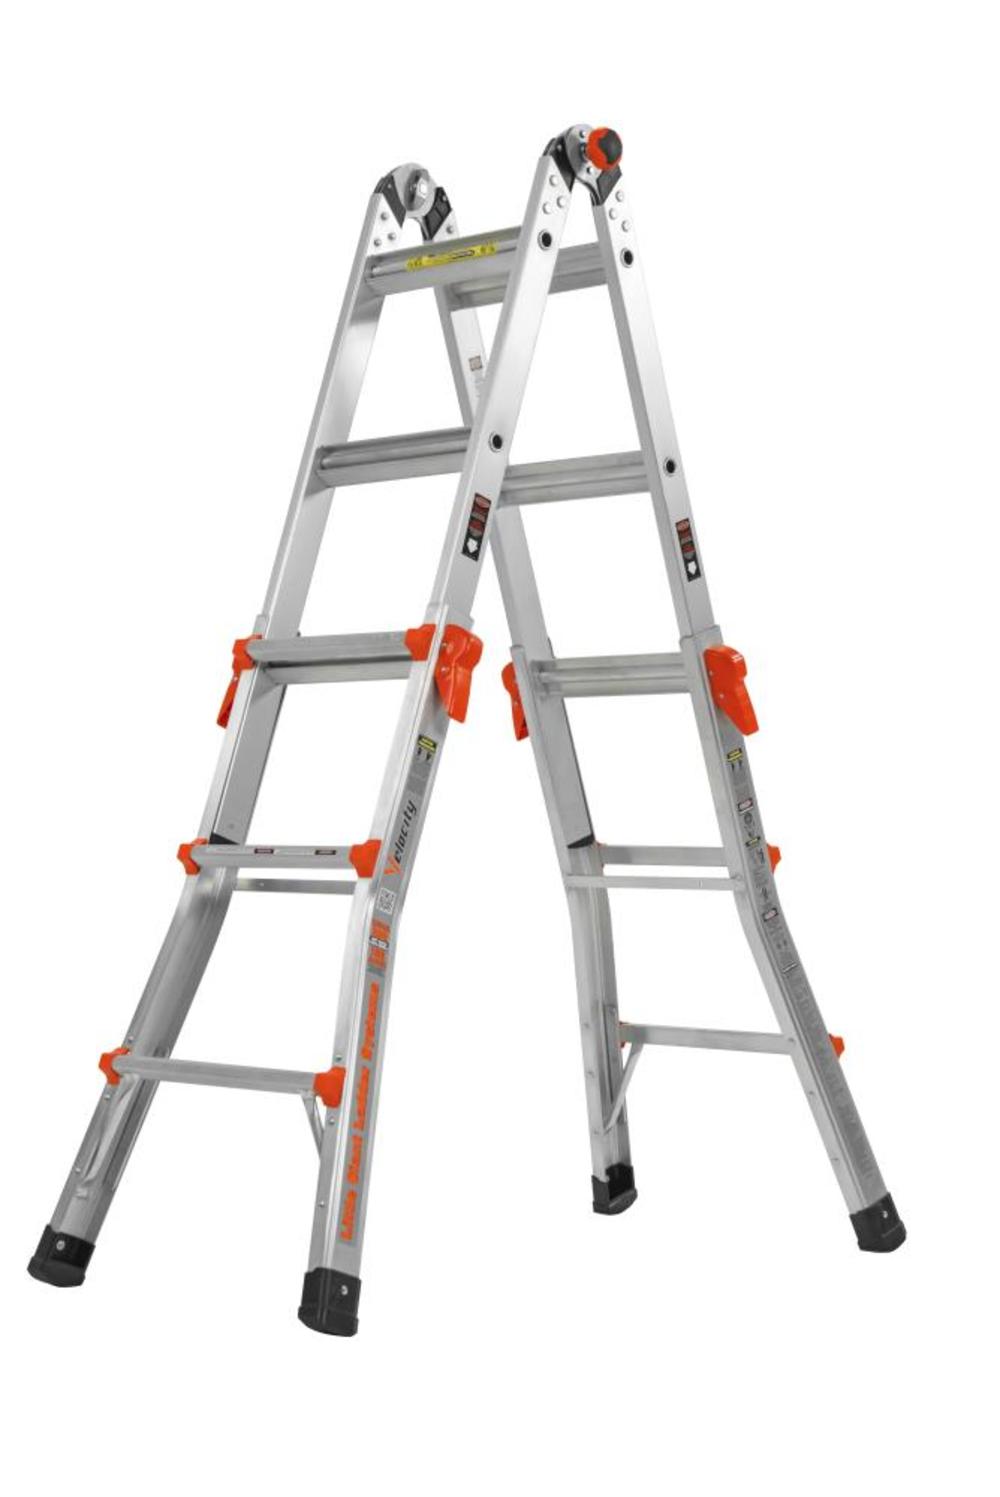 Details about   Little Giant 13-Foot Velocity Multi-Use Ladder 300lbs Duty Rating 15413-001 p0p 